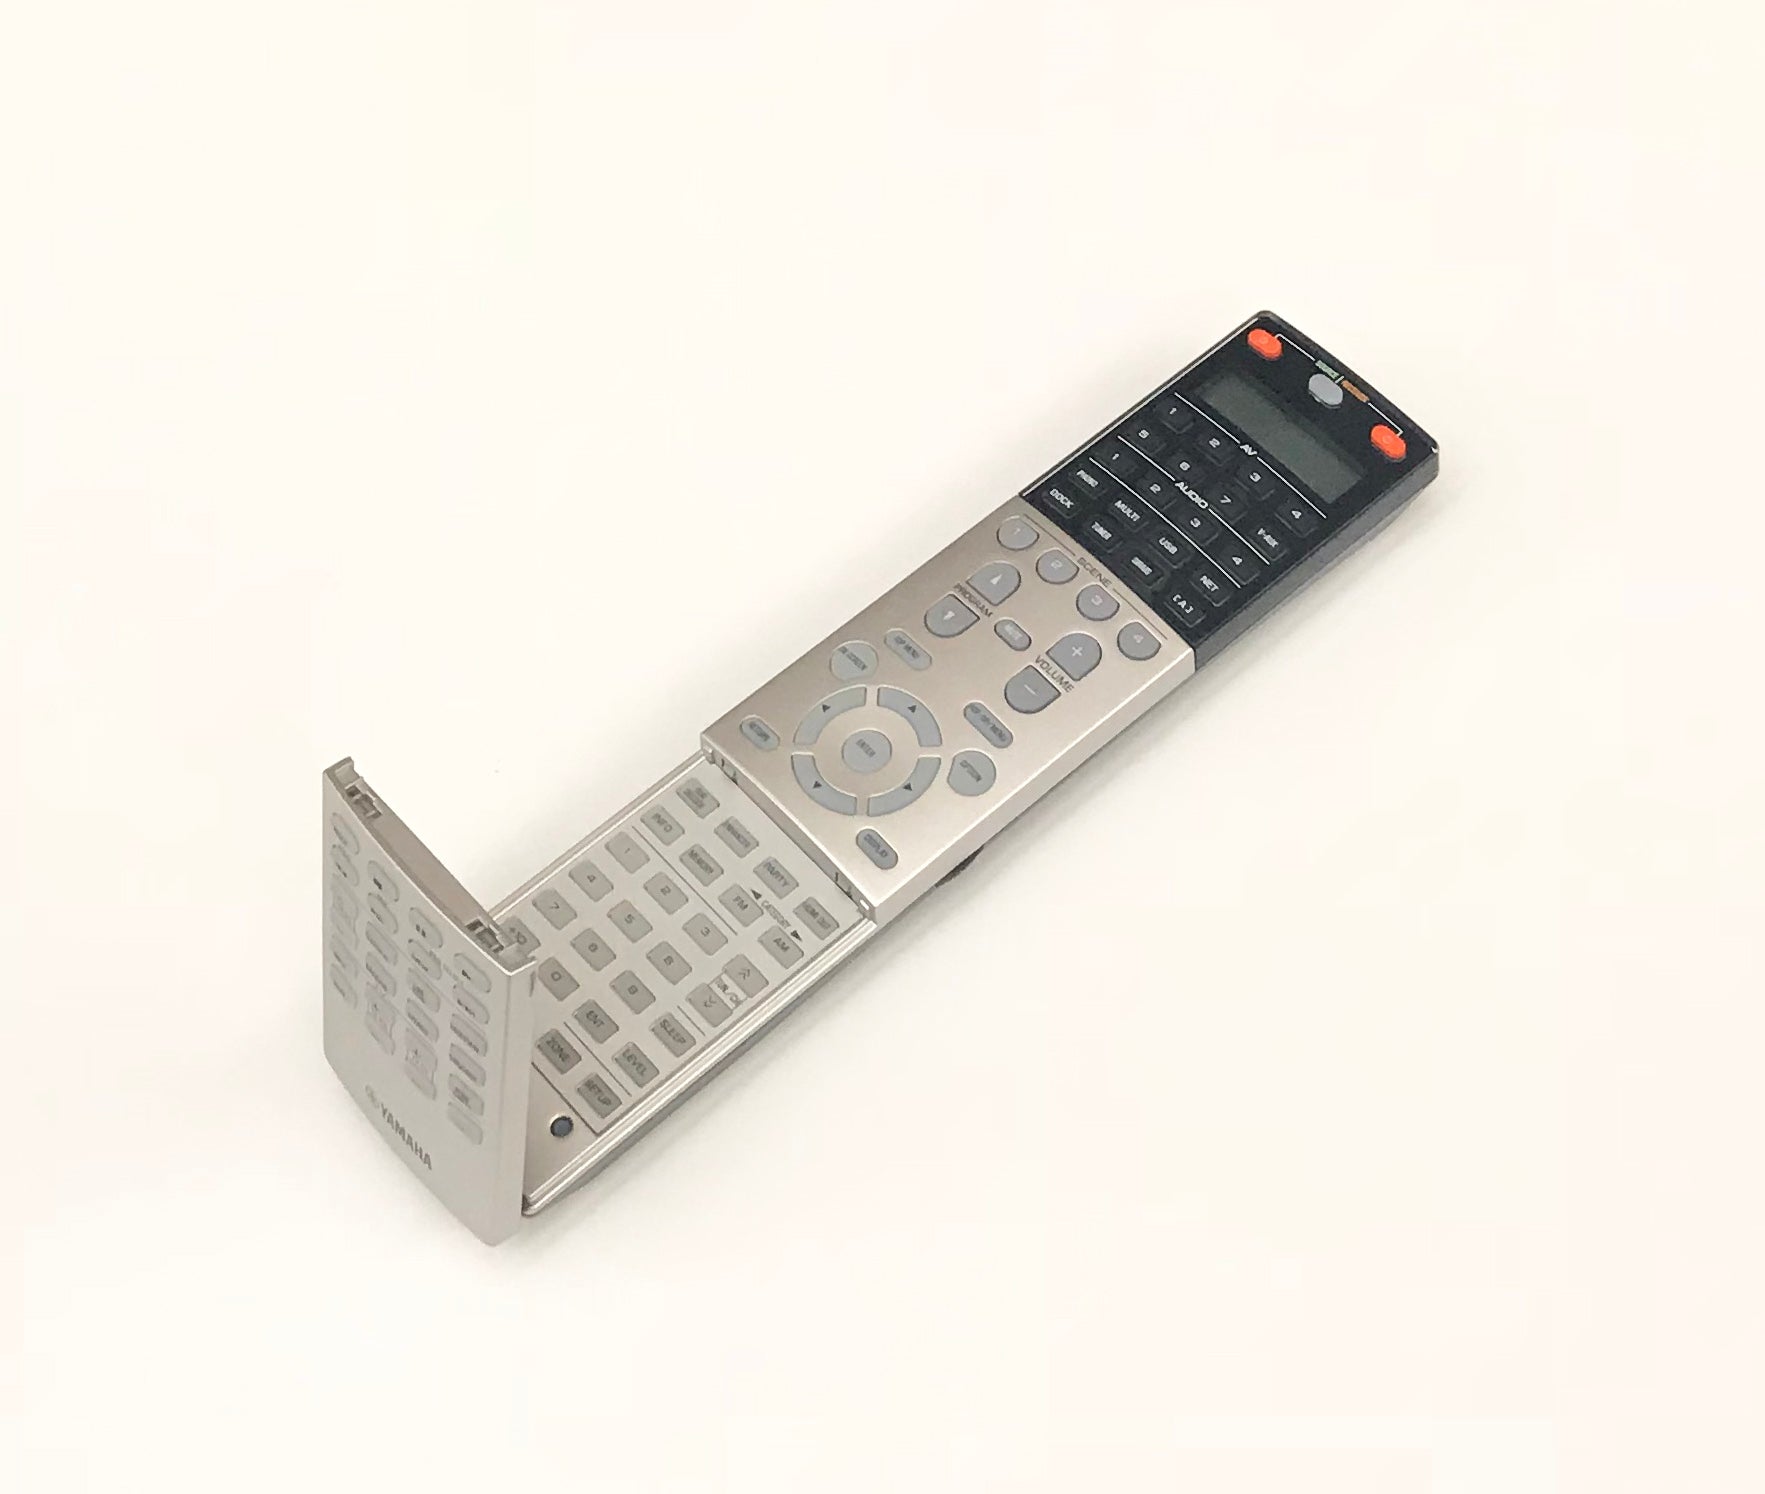 NEW OEM Yamaha Remote Control Shipped With RXA3010, RX-A3010